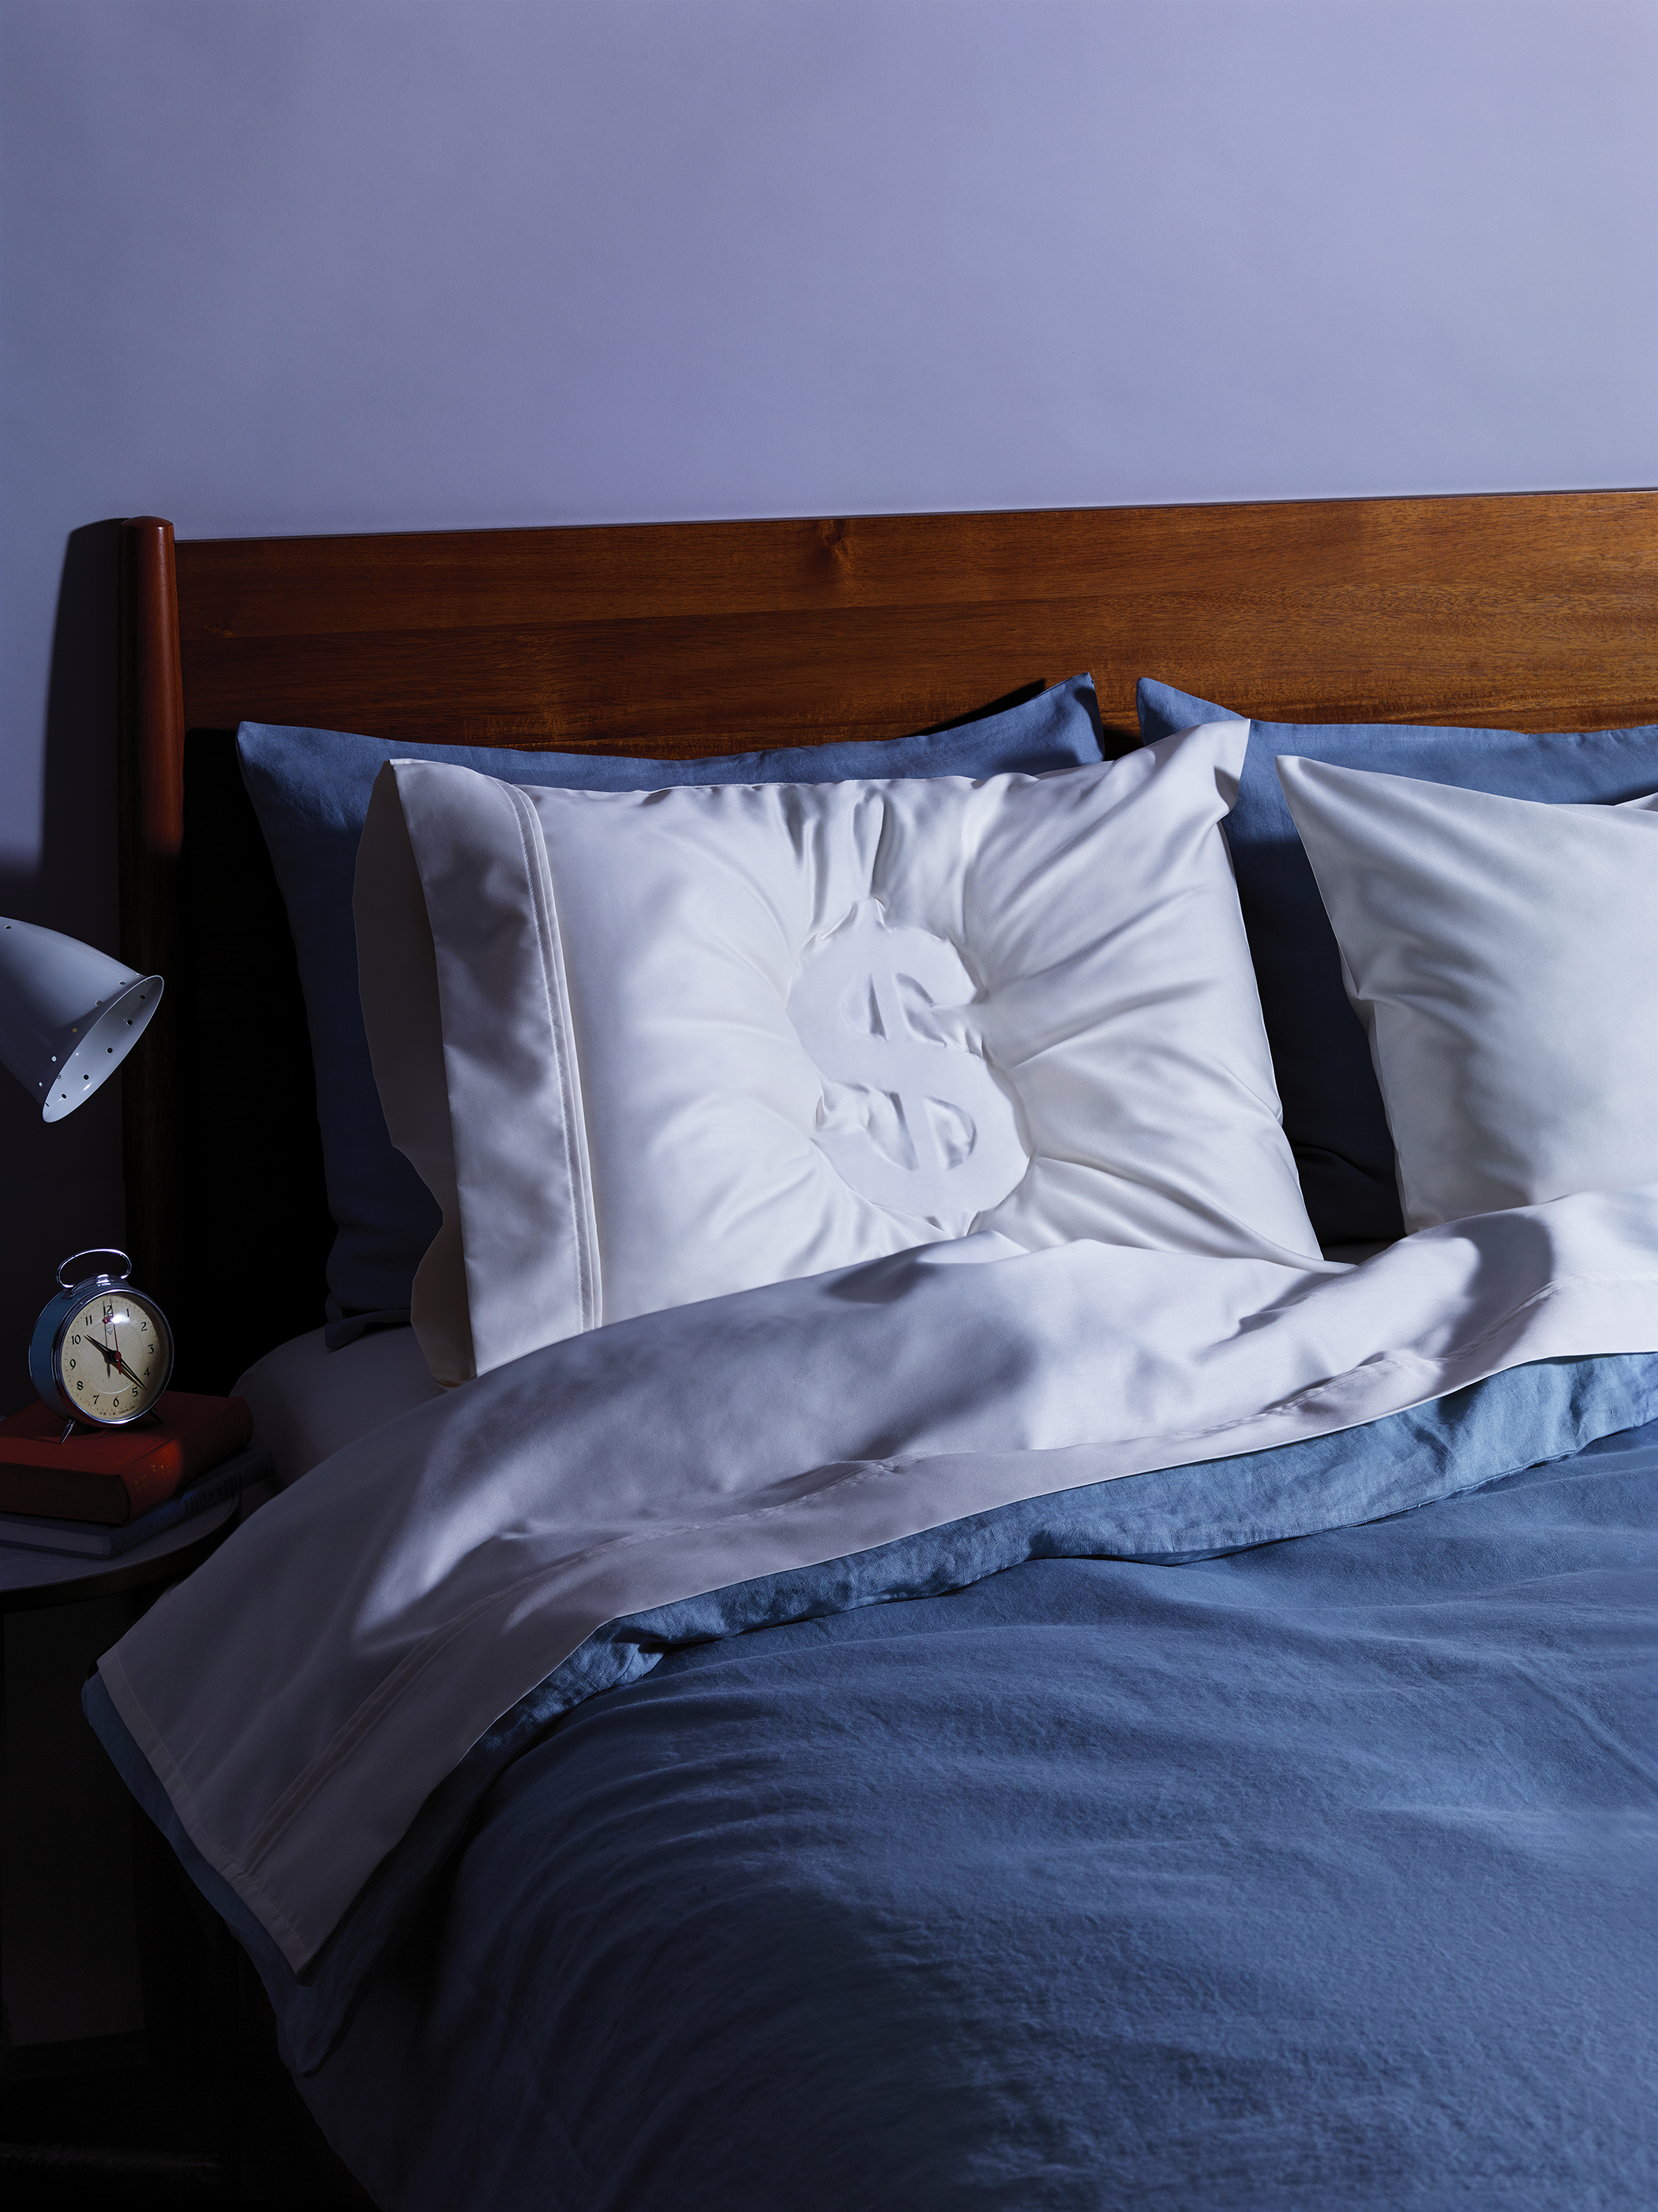 Use These Tricks for a Better Night's Sleep